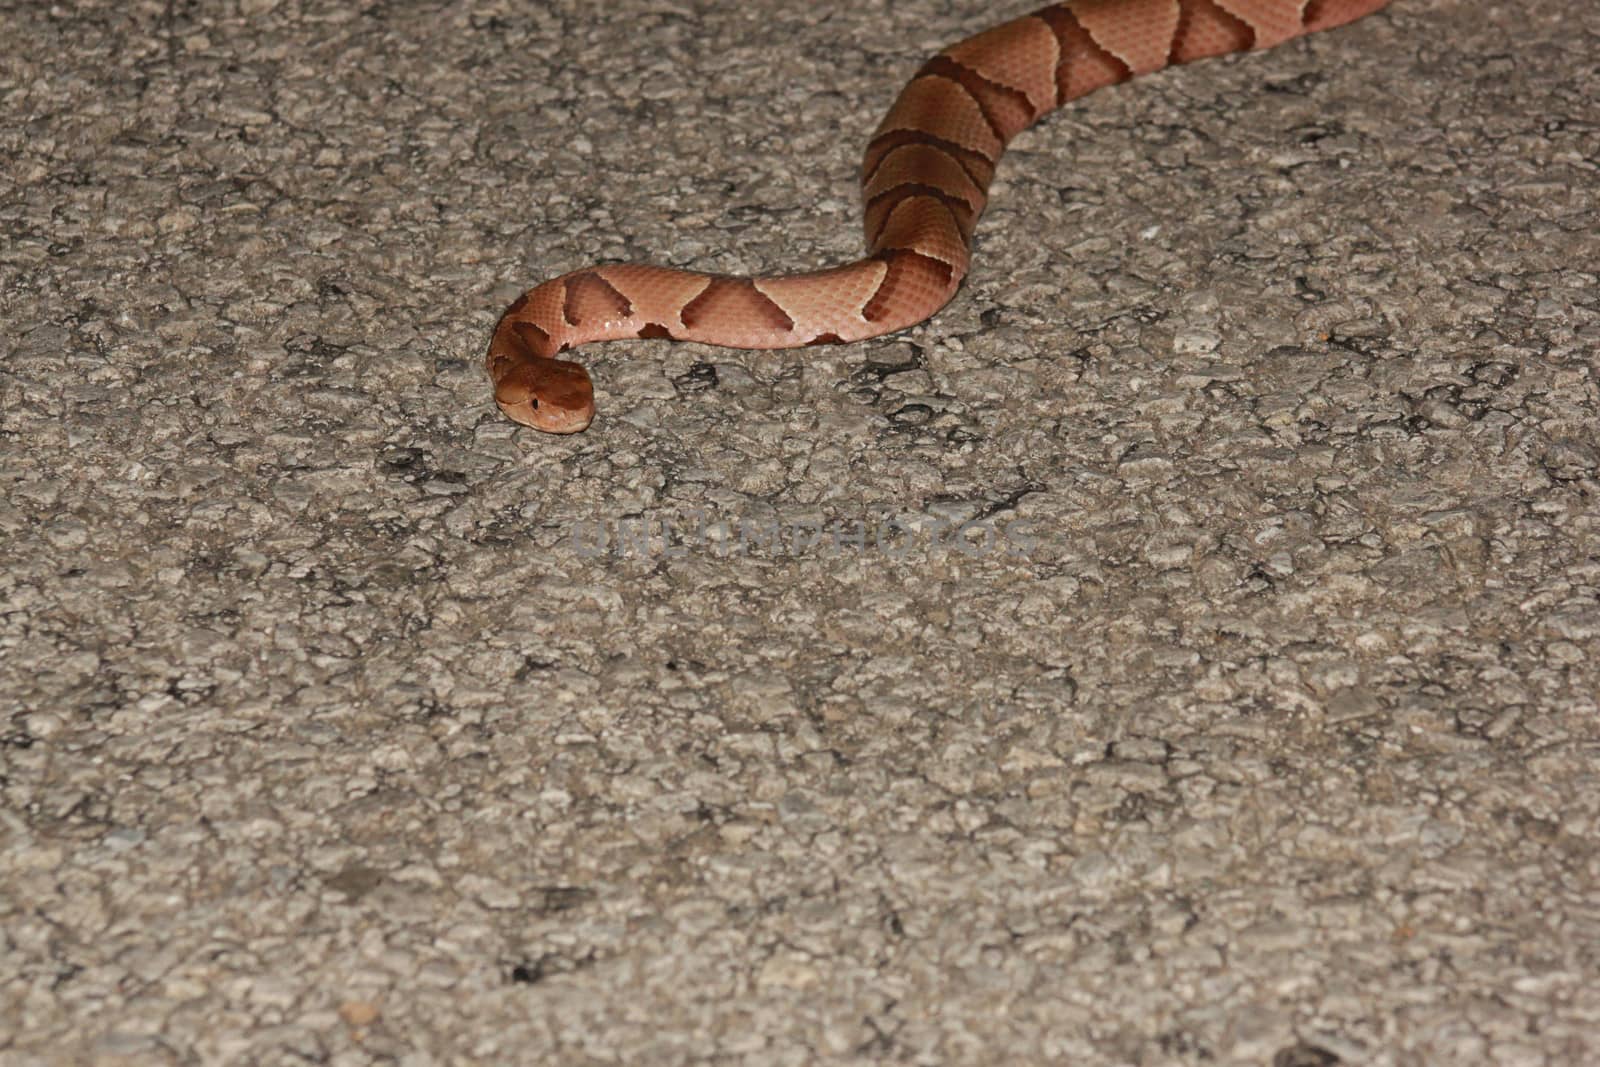 Copperhead lurking in the road